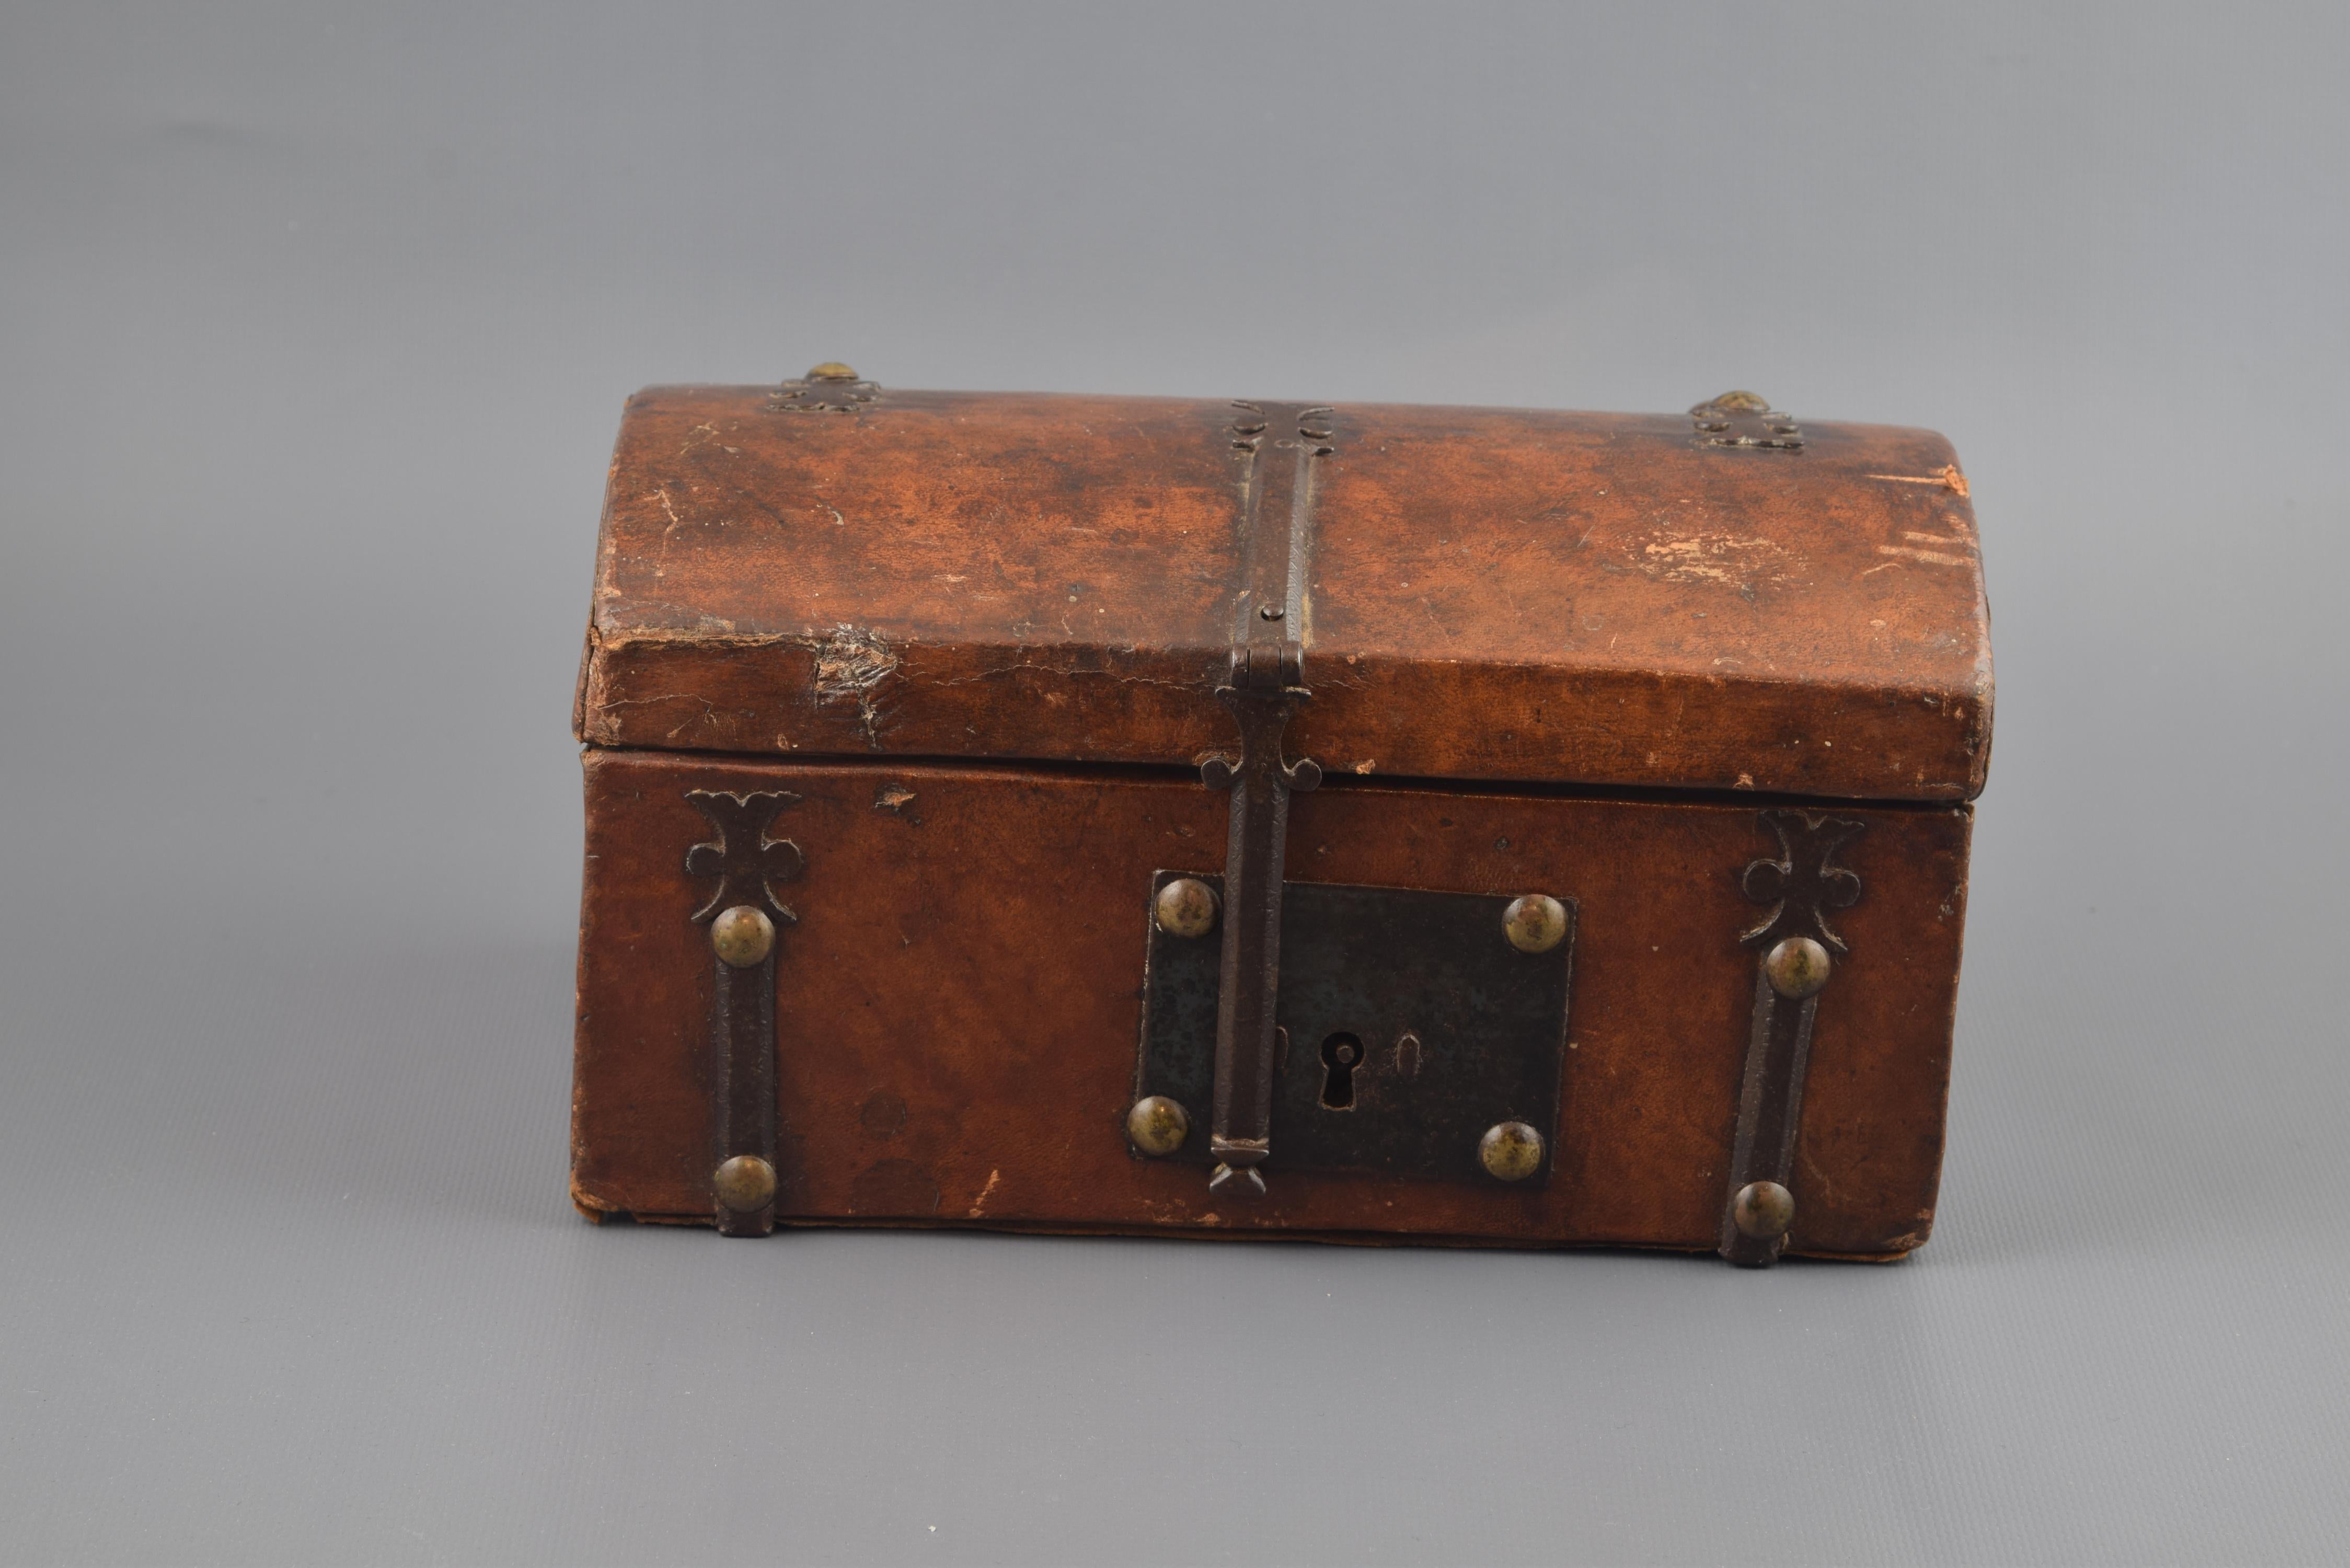 Rectangular casket with curved lid which is joined by hinges, made of carved wood and decorated to the outside with a worked leather cover (which also protects the interior) on which metal fasteners and fittings and a lock with rectangular shield.